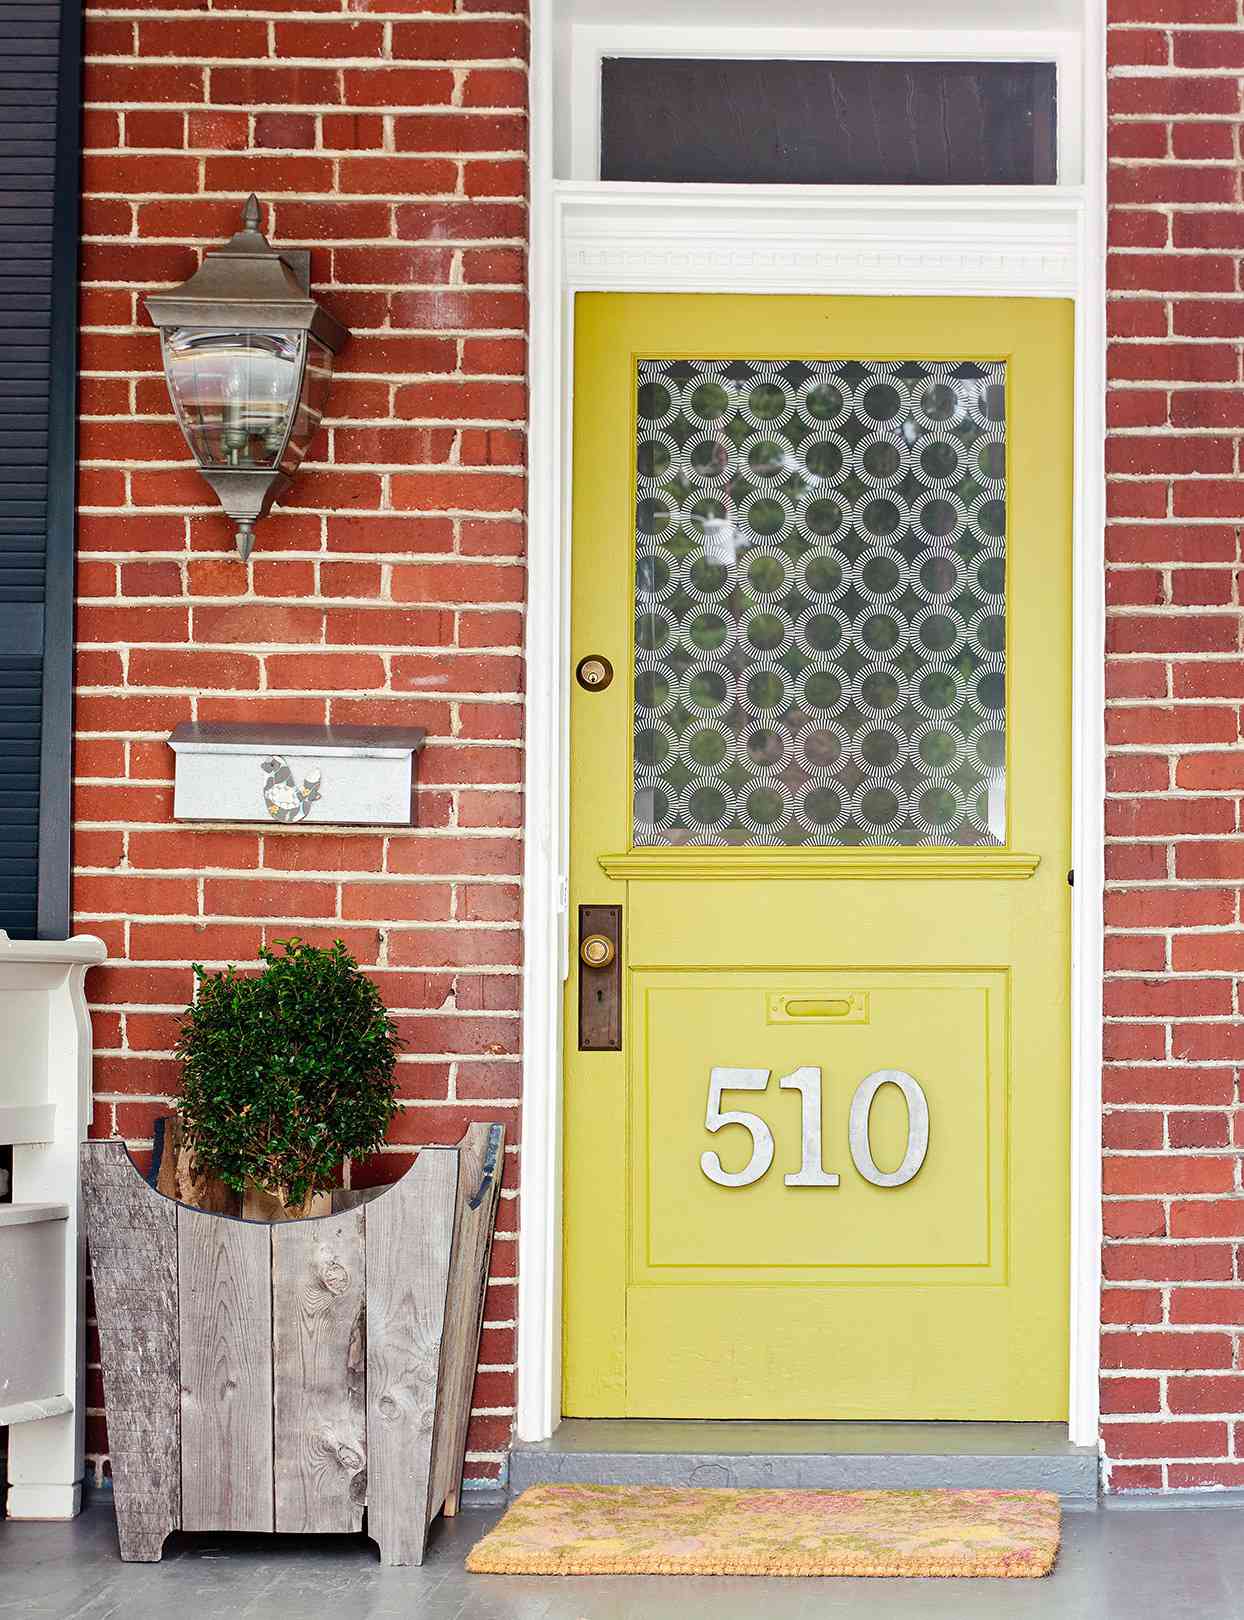 yellow-green front door with large numbered address